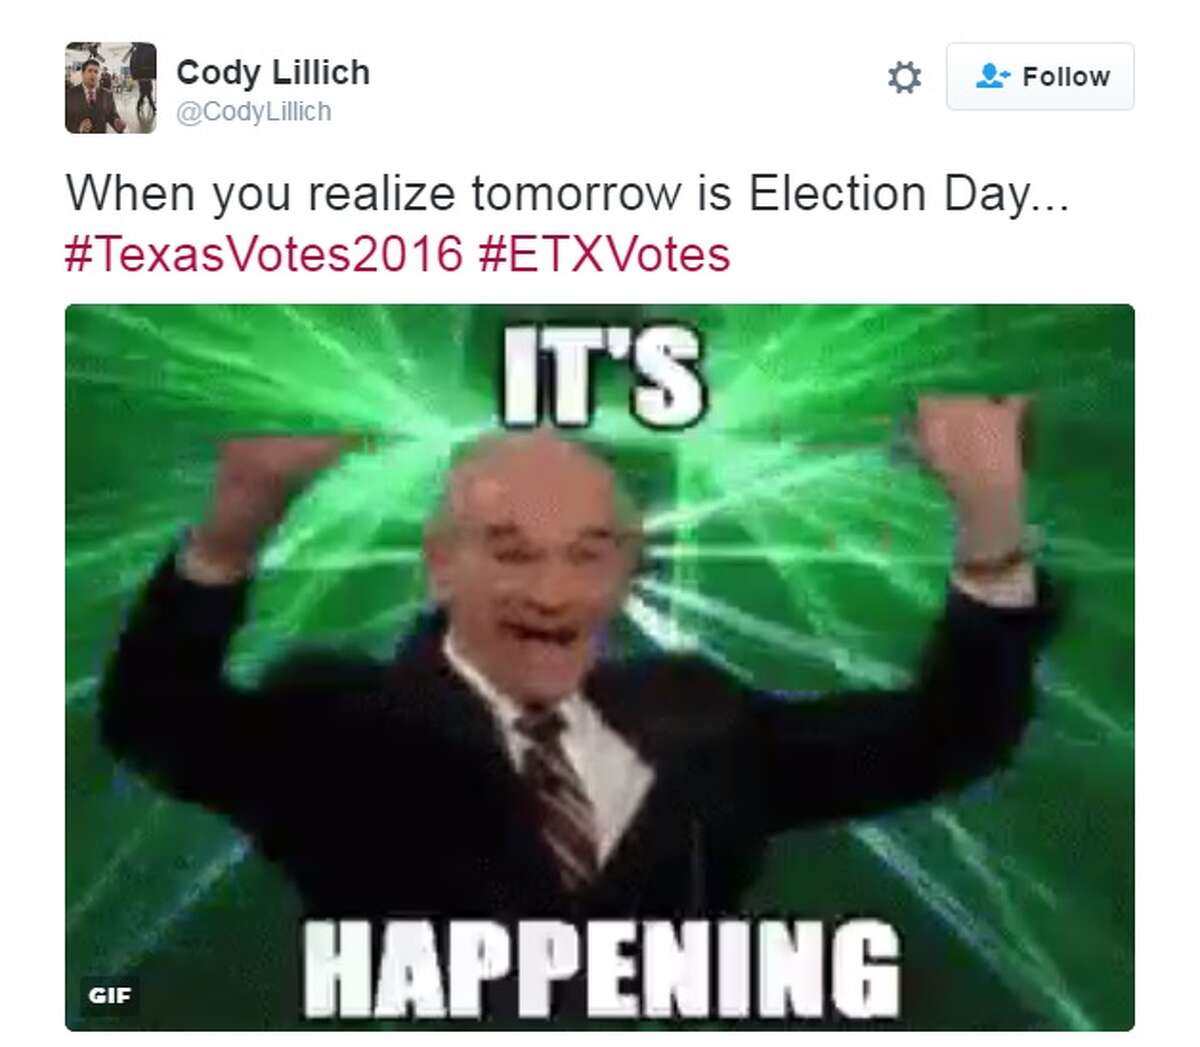 “When you realize tomorrow is Election Day... #TexasVotes2016 #ETXVotes,” @CodyLillich.